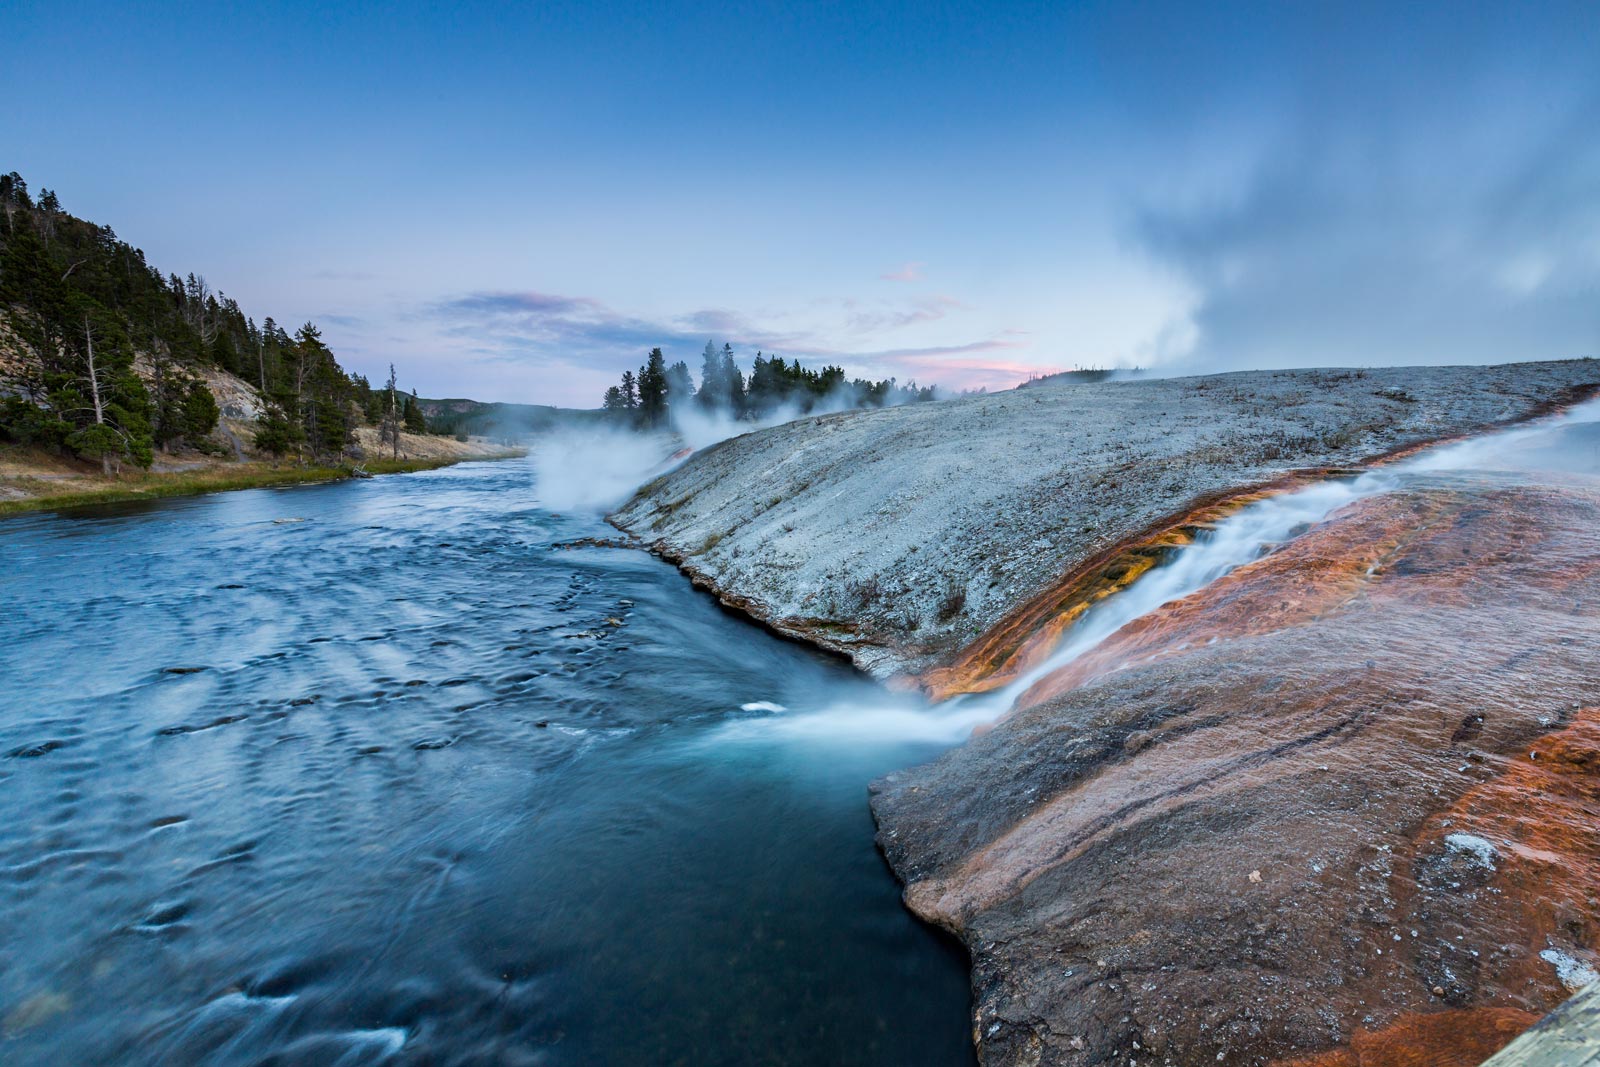 Hiking the Midway Geyser Basin in Yellowstone